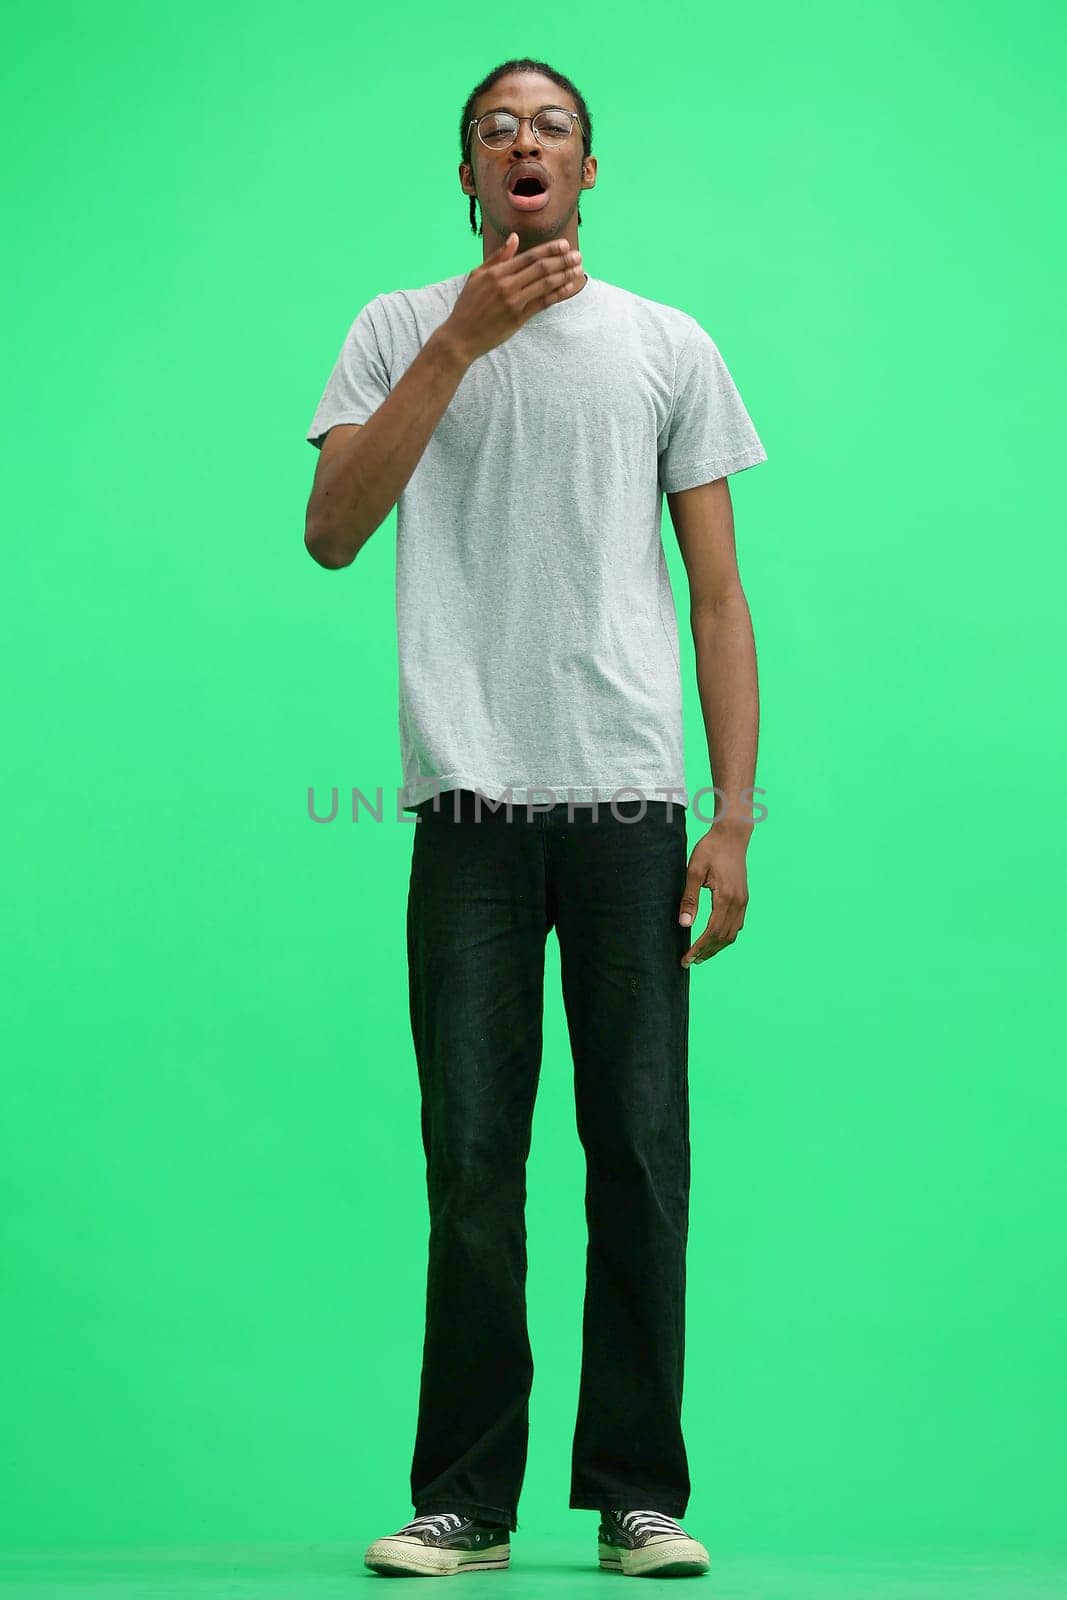 A man in a gray T-shirt, on a green background, full-length, w by Prosto